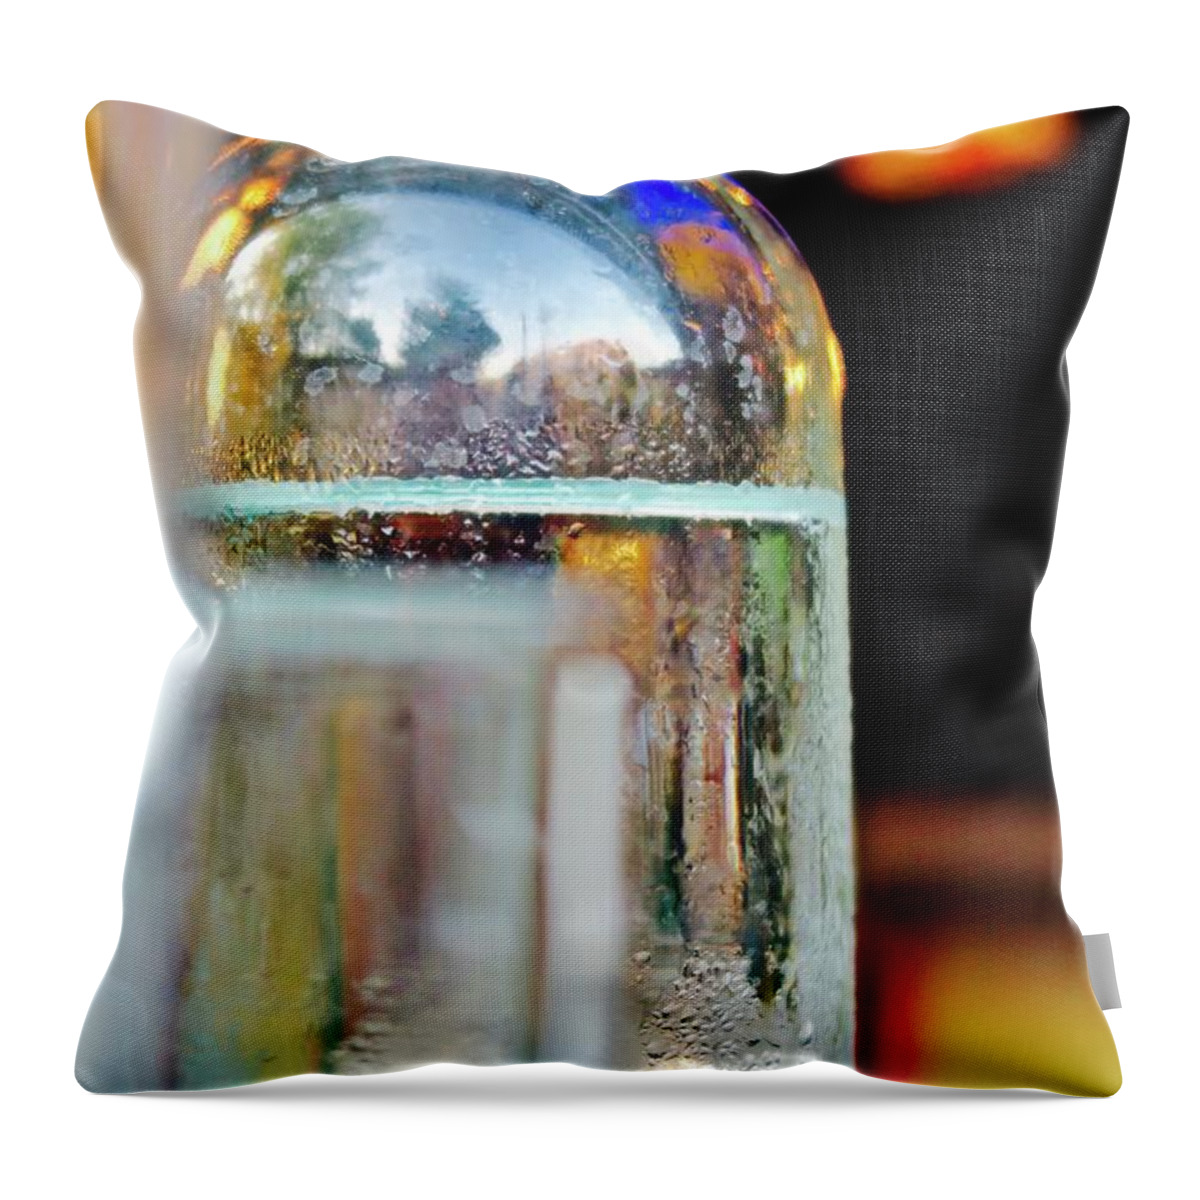 Bottle Throw Pillow featuring the photograph Vapor by Mike Reilly